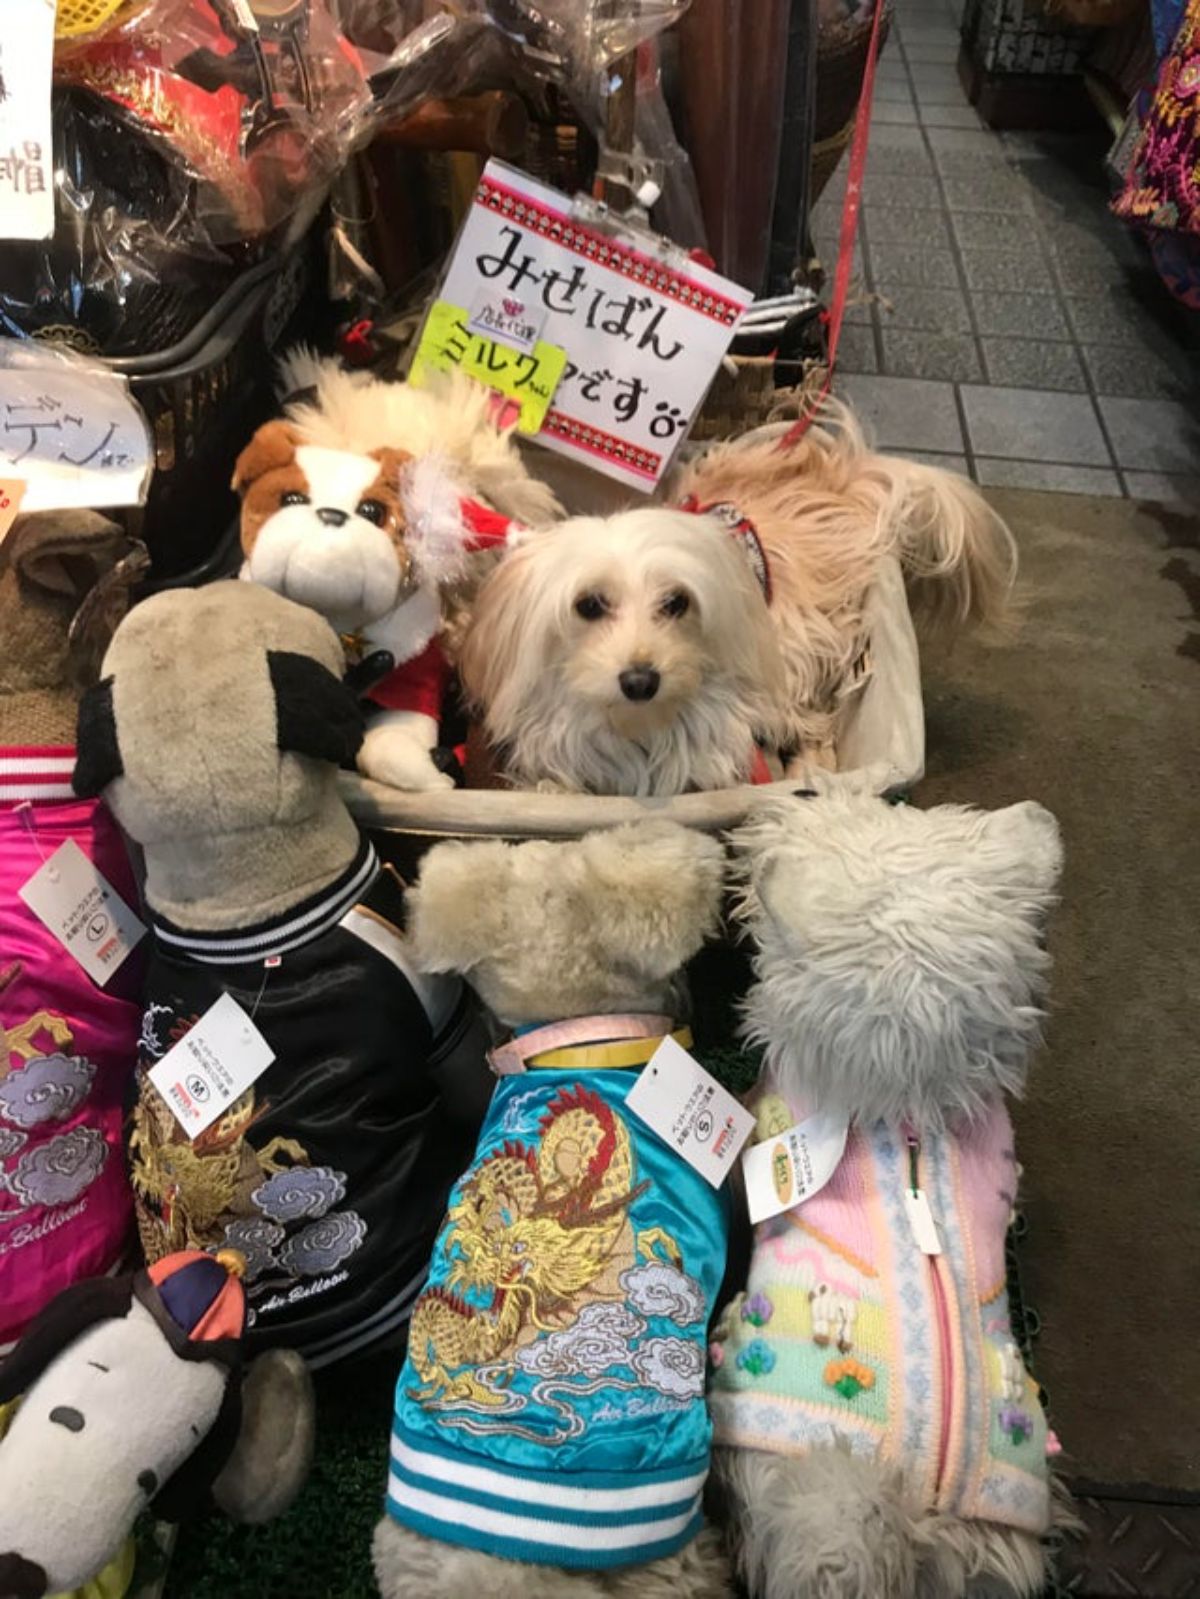 stuffed toys - a fluffy white dog sitting in a basket of stuffed toys being surrounded by stuffed toys